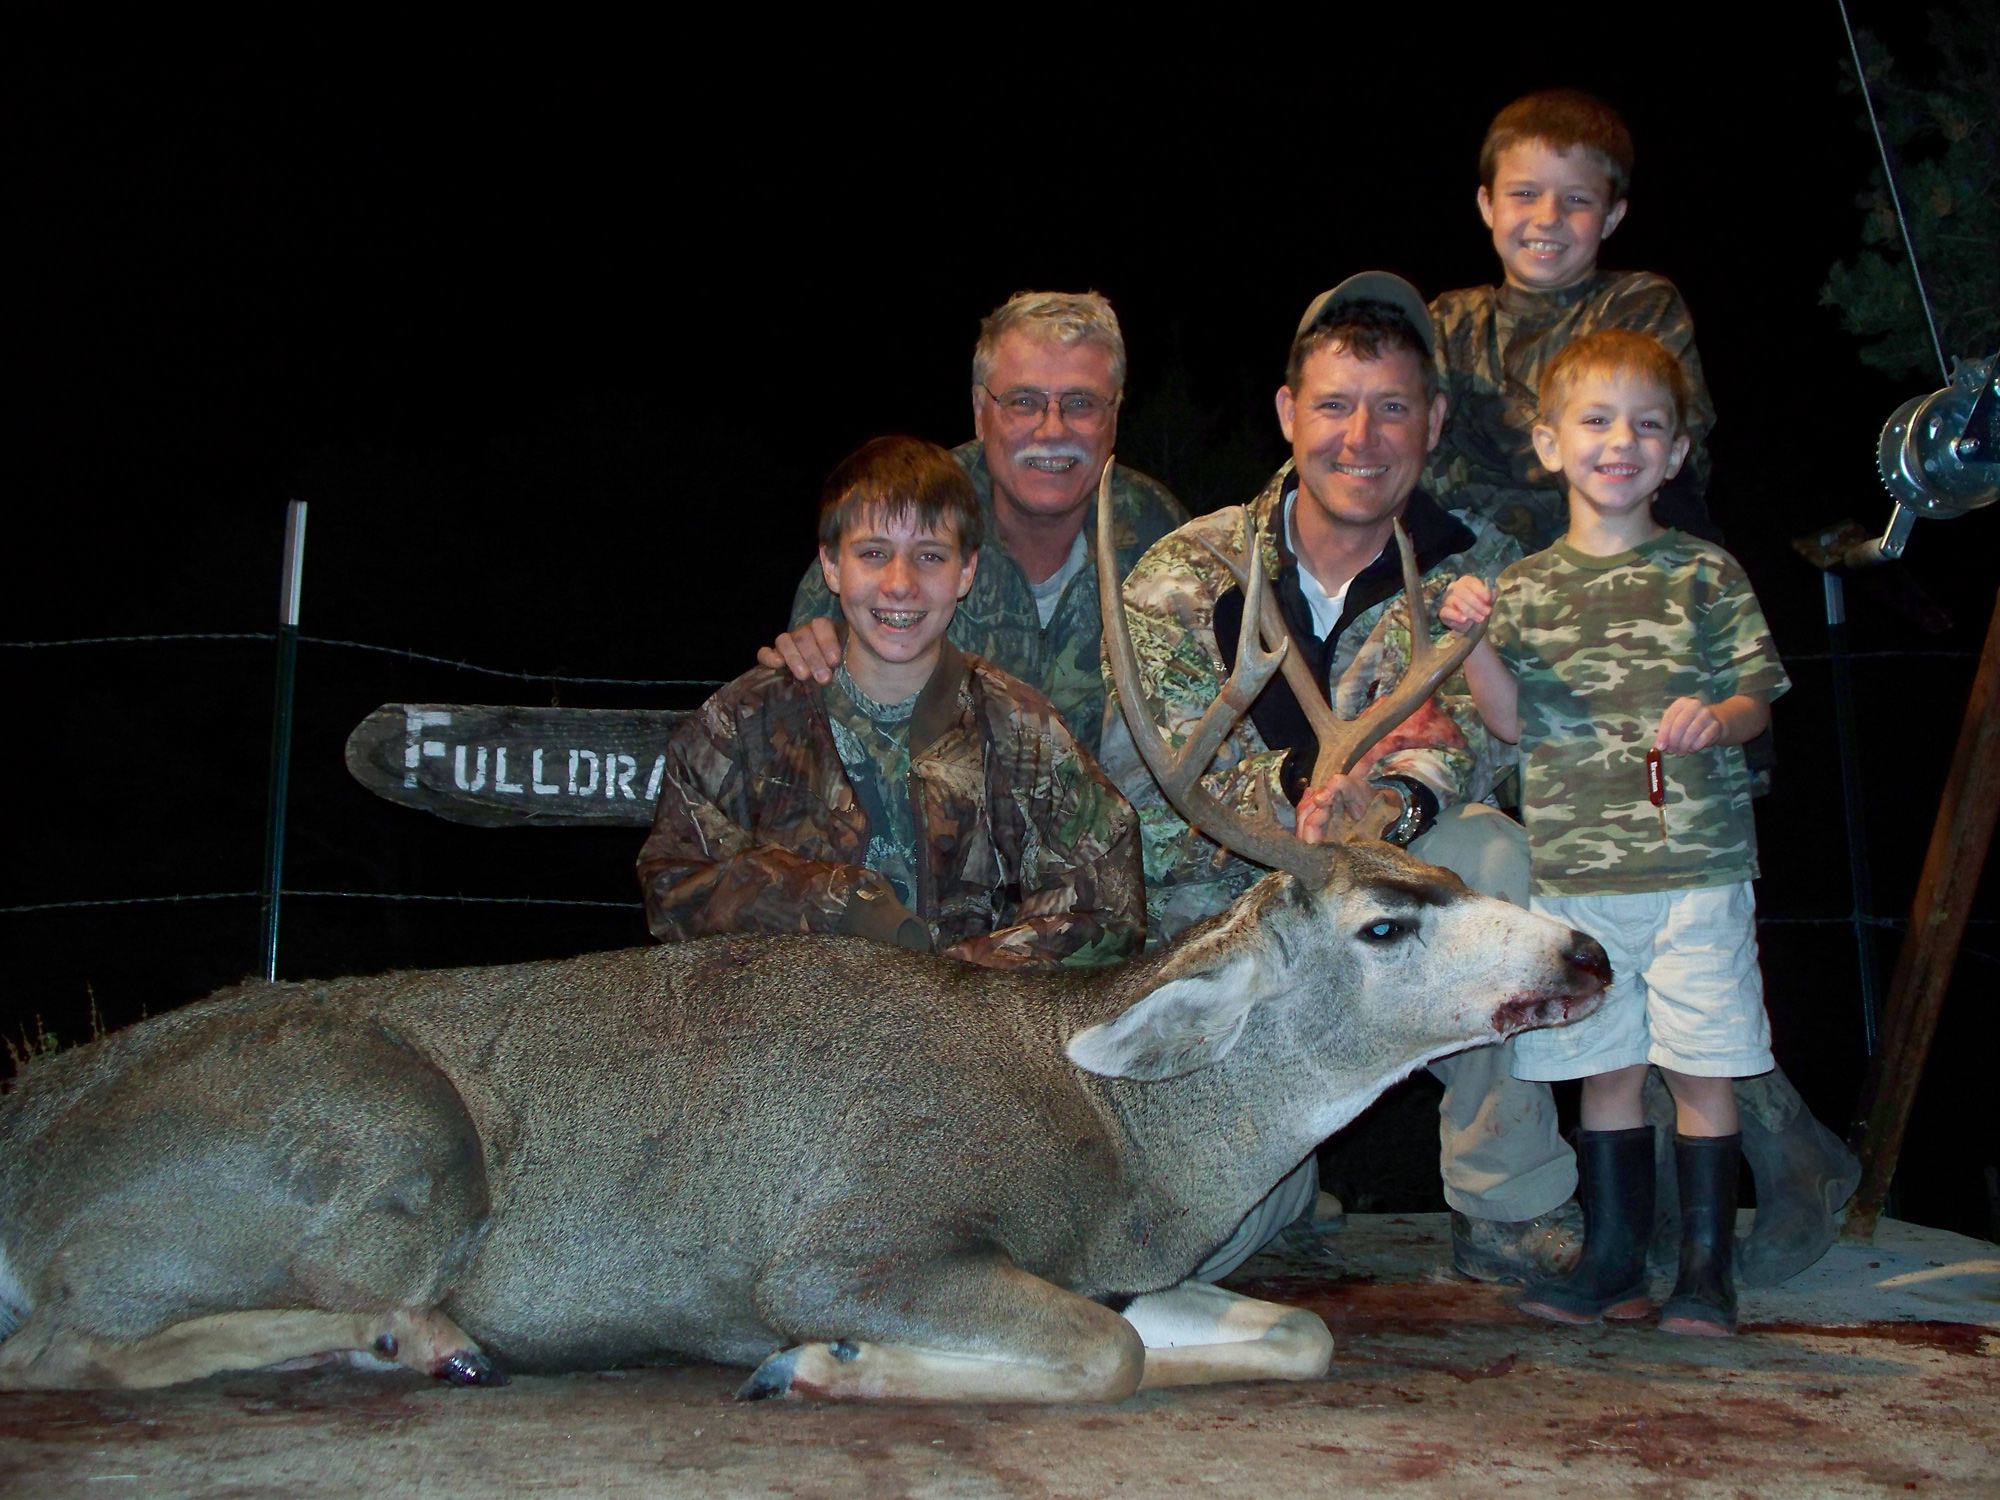 kids hunting with their family